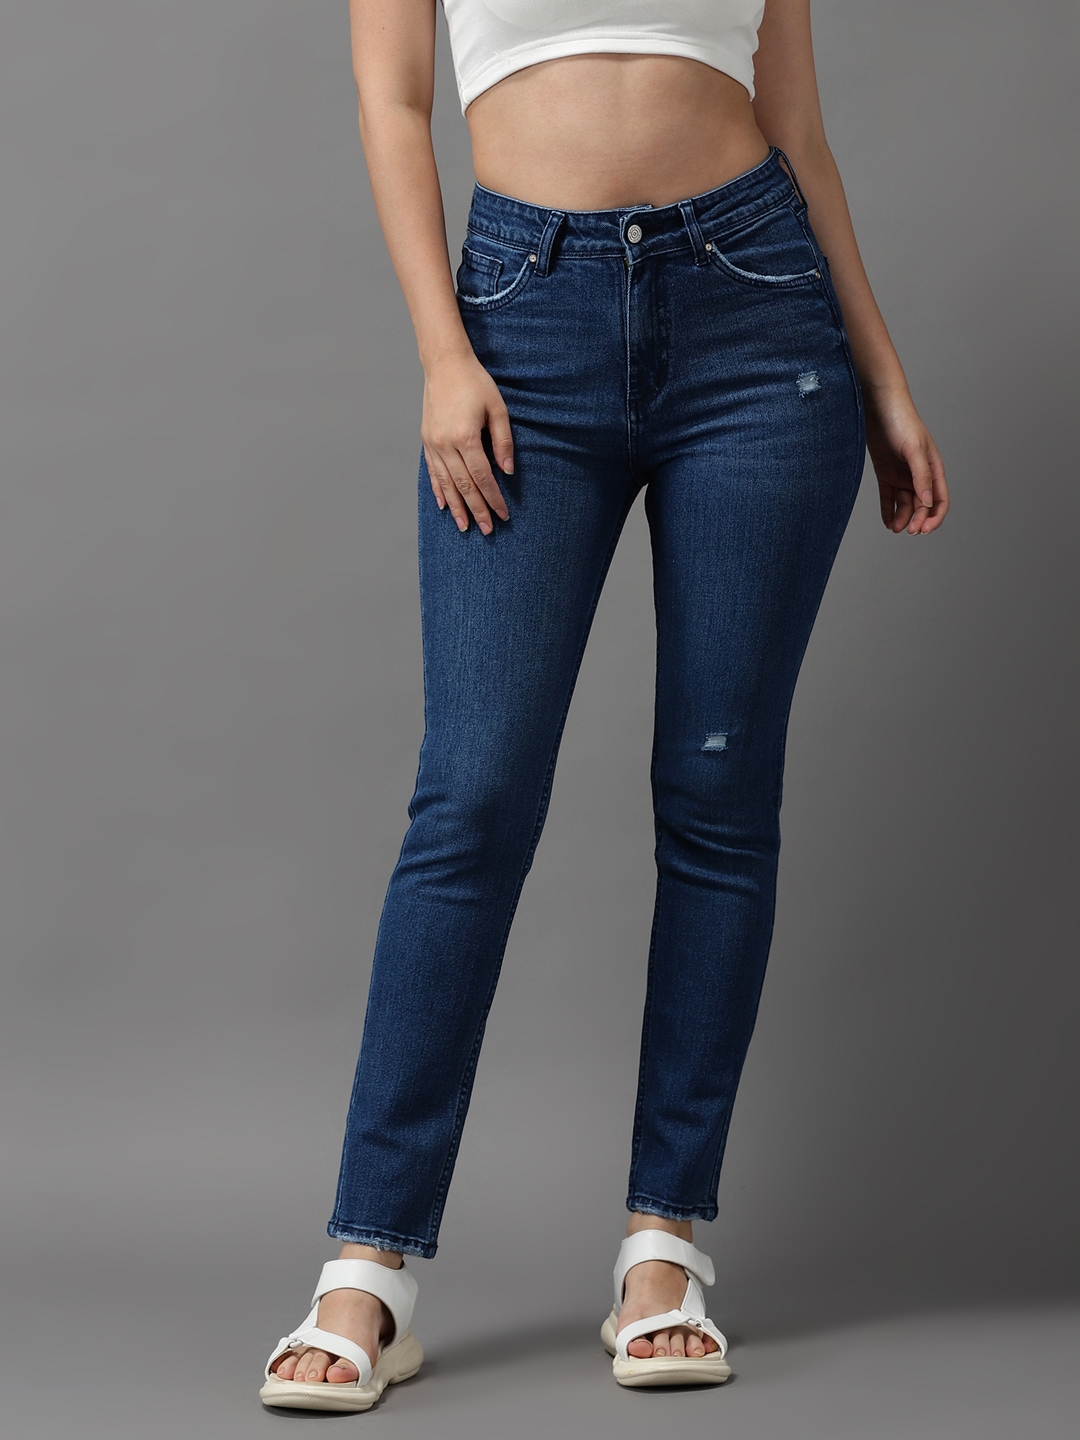 Showoff | SHOWOFF Women's High-Rise Navy Blue Low Distress Jeans